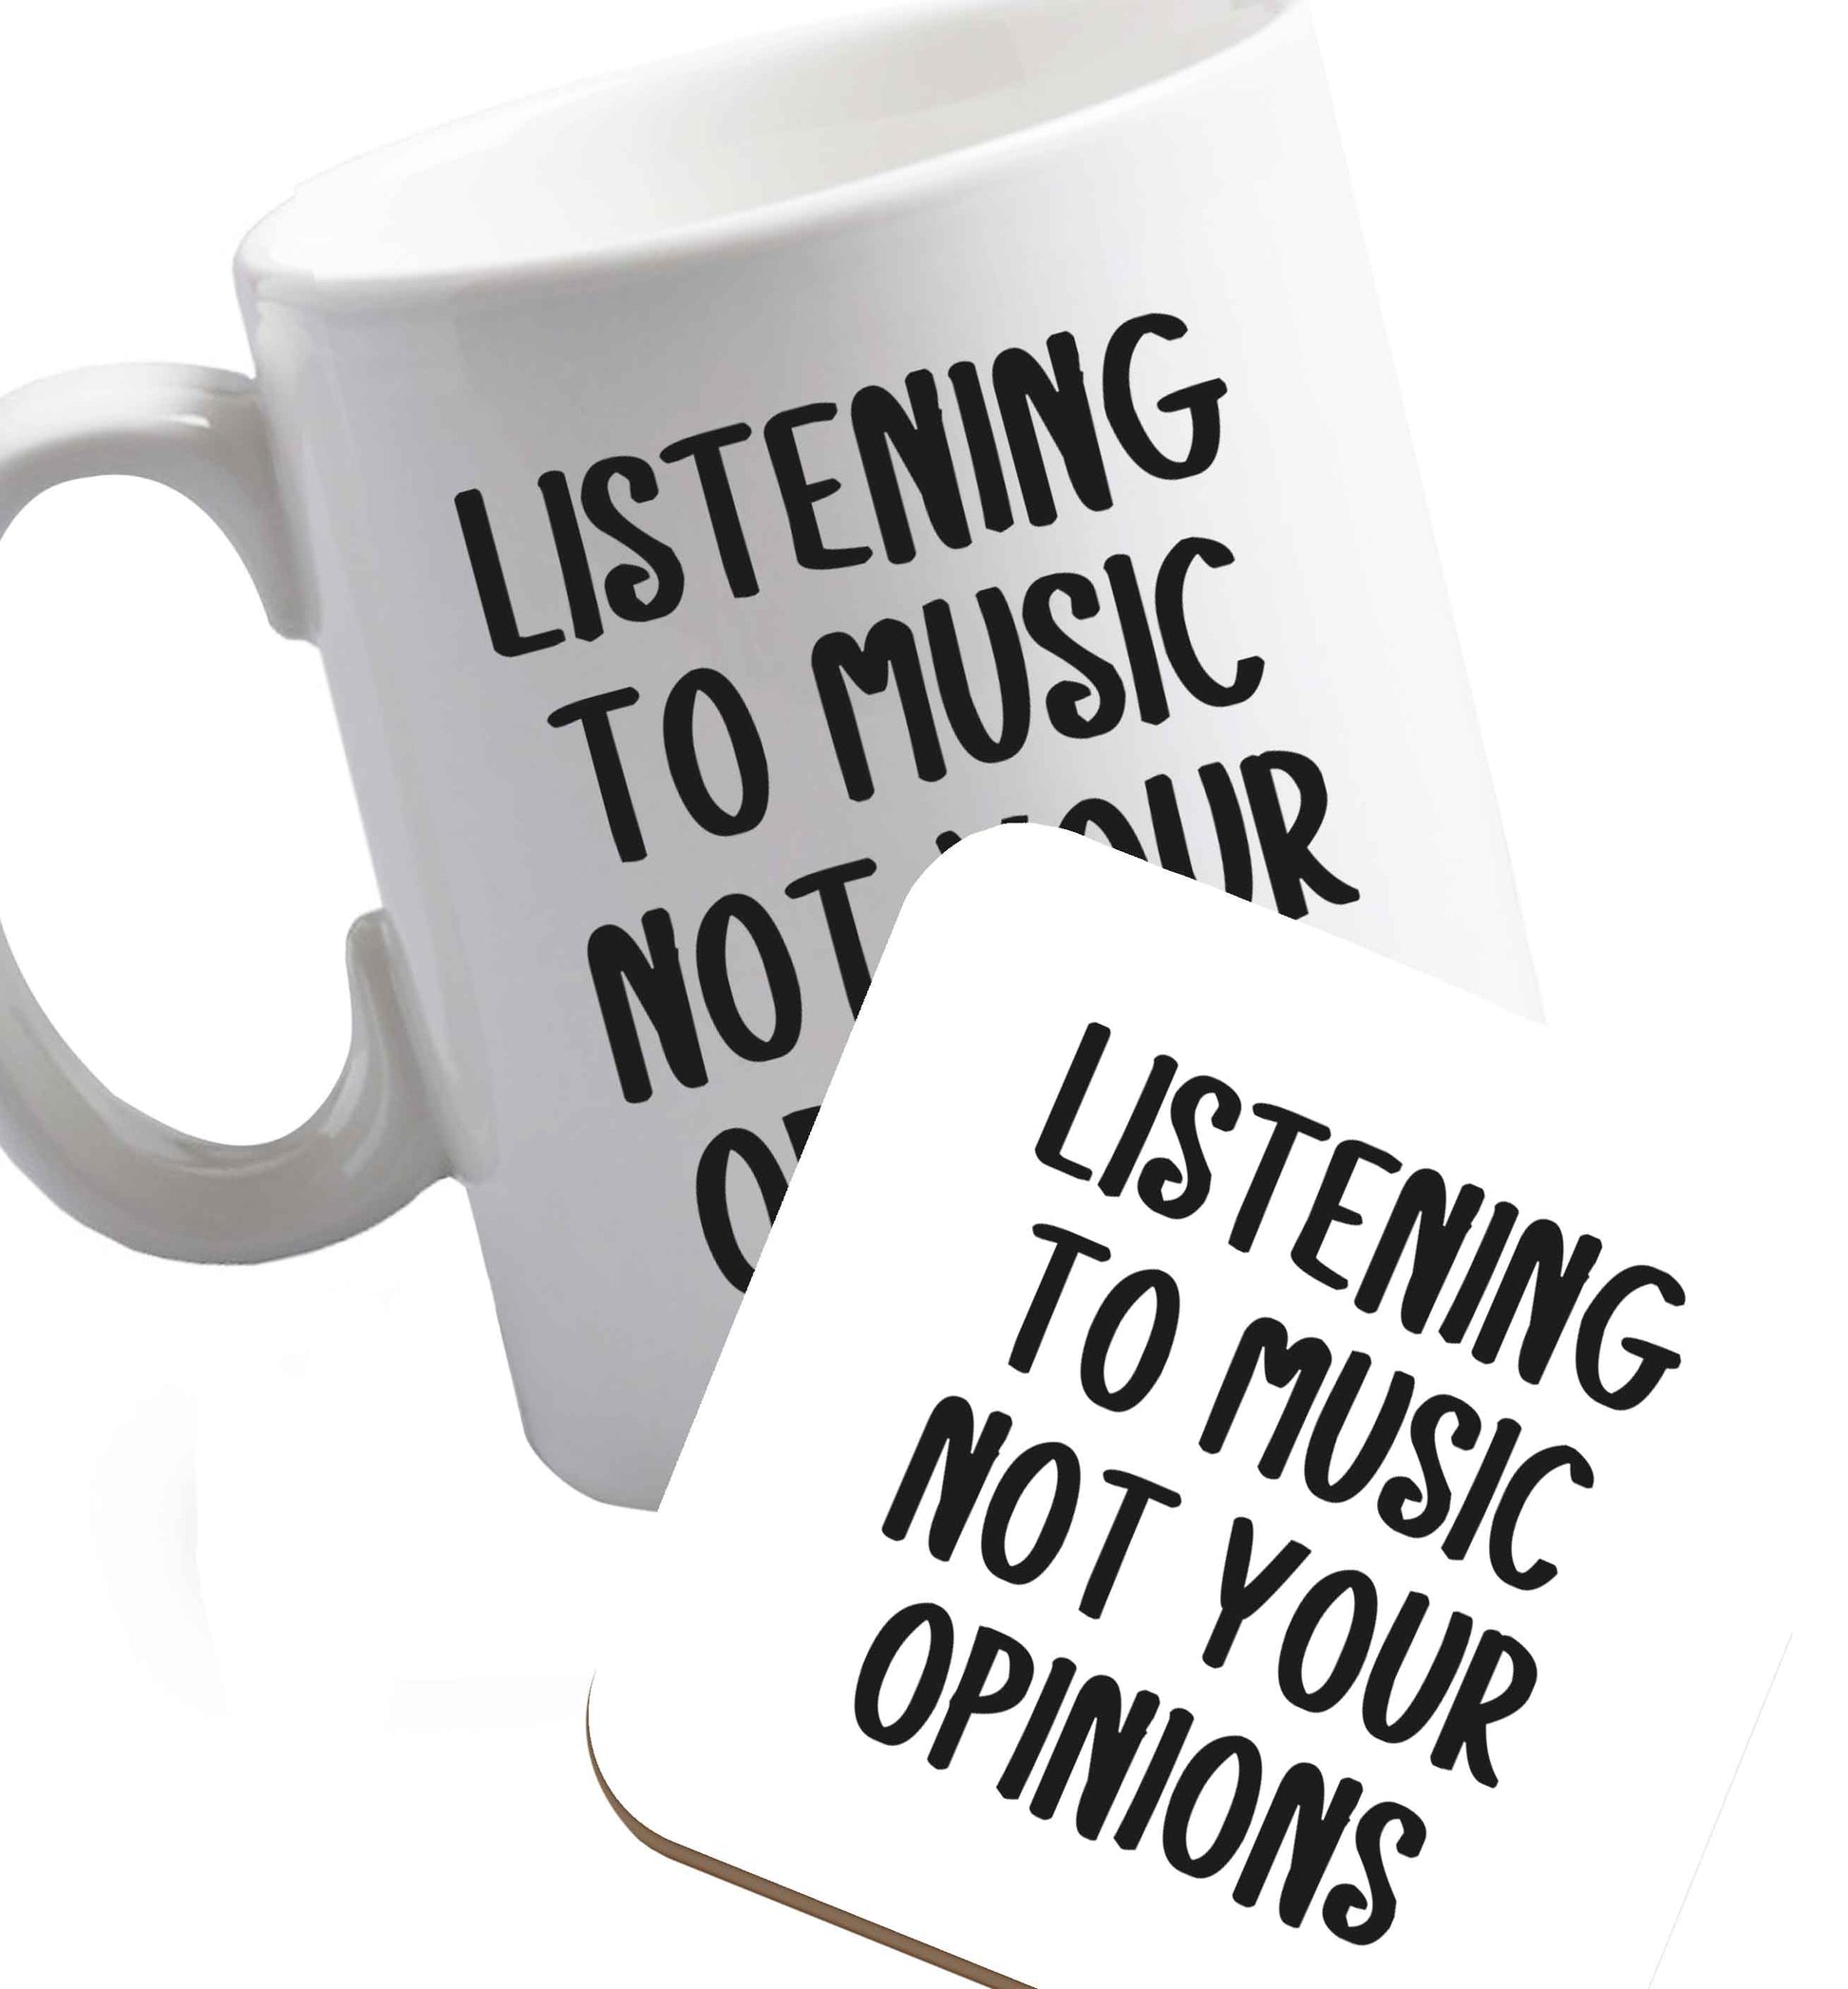 10 oz Listening to music not your opinions  ceramic mug and coaster set right handed